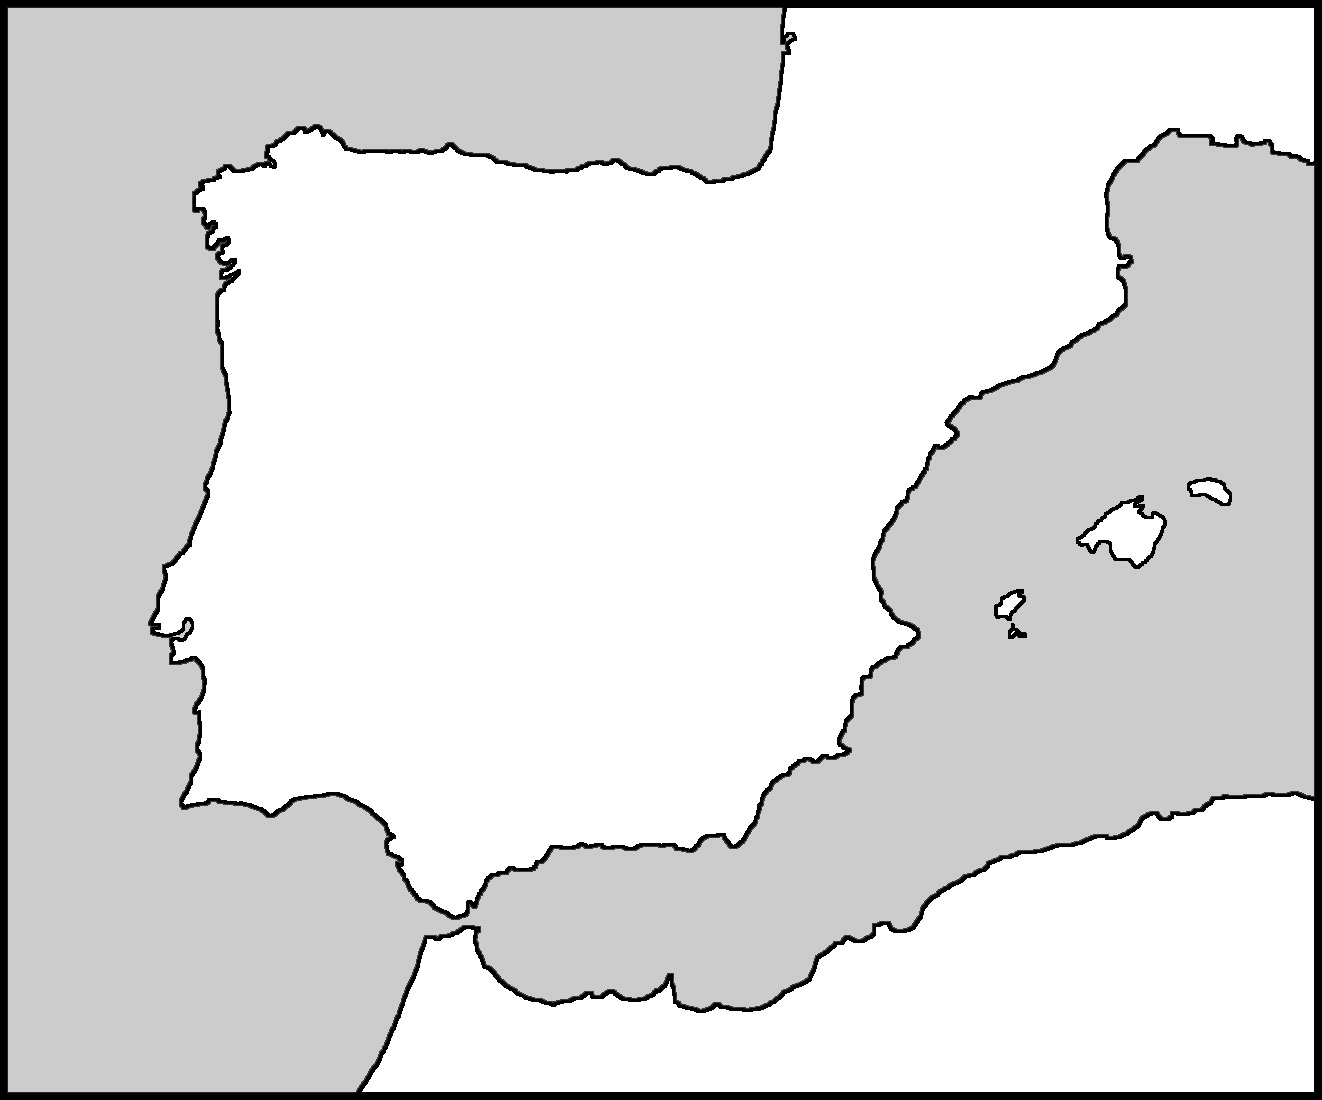 clipart map of spain - photo #41